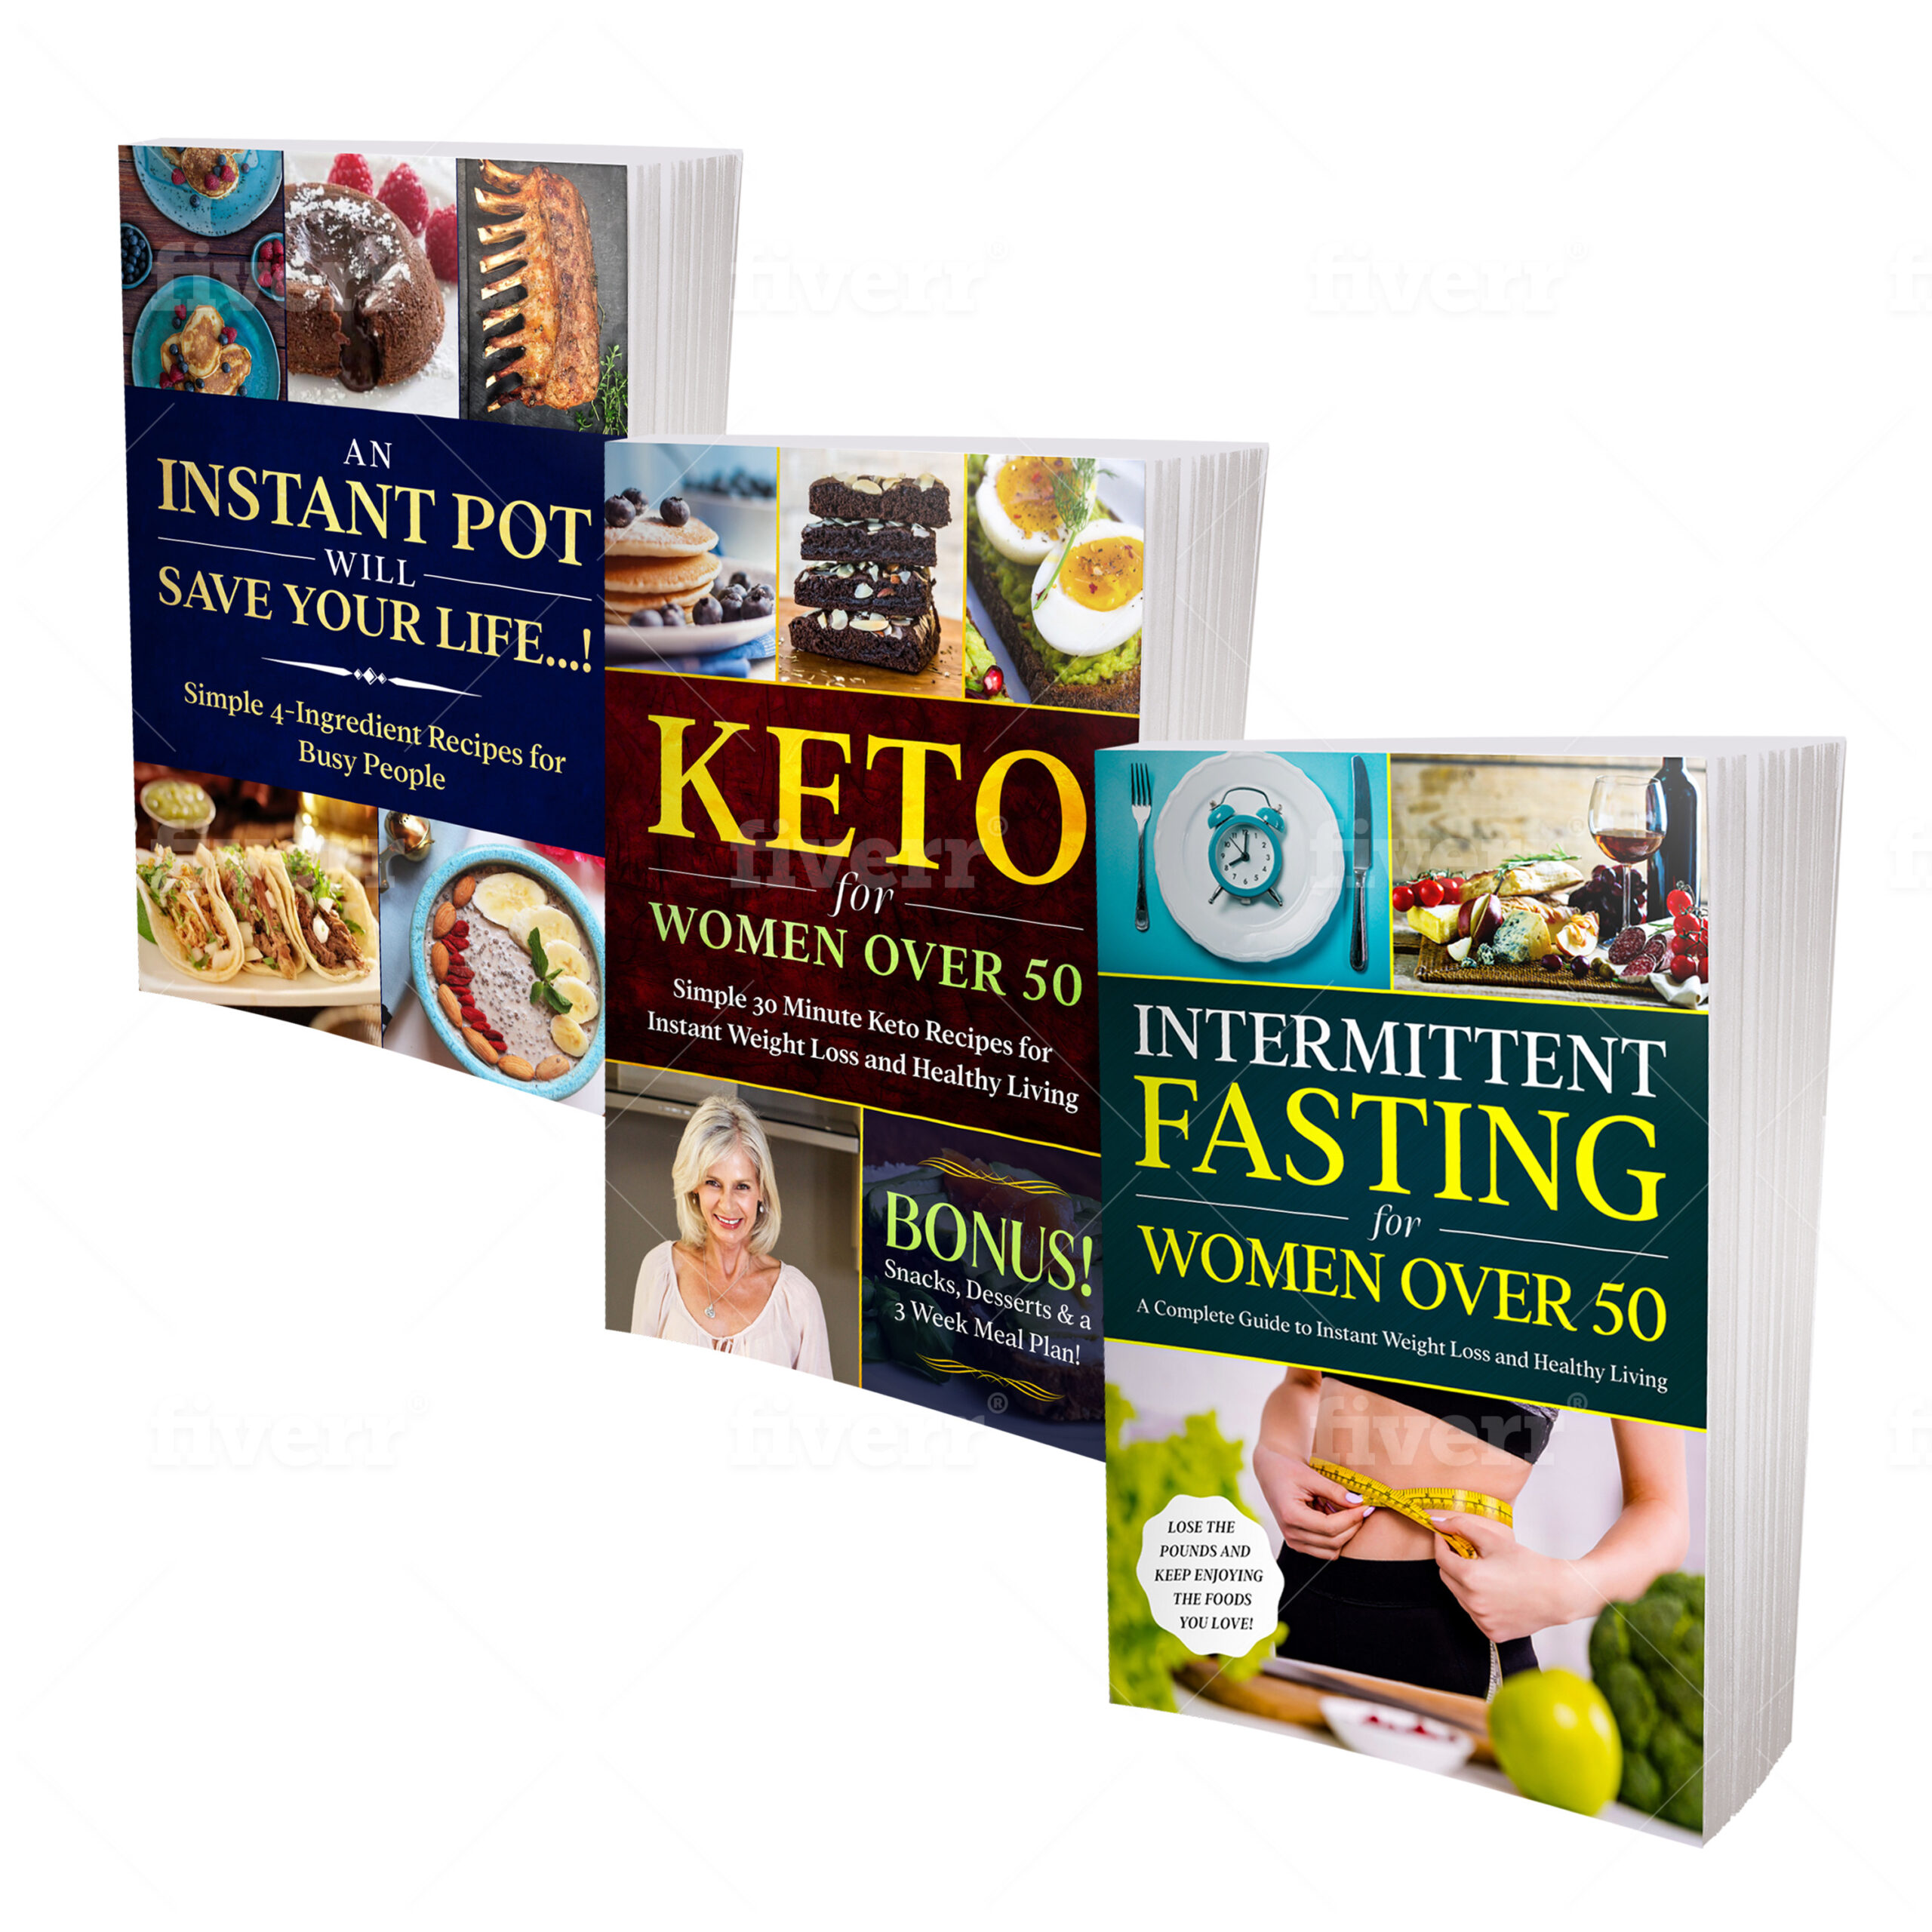 FREE: Weight Loss Secrets For Women Over 50: 3 Books in 1 – Keto Diet, Intermittent Fasting & Instant Pot Cookbook: Kick-Start Your Metabolism, Look and Feel Great! by Karen Corcoran